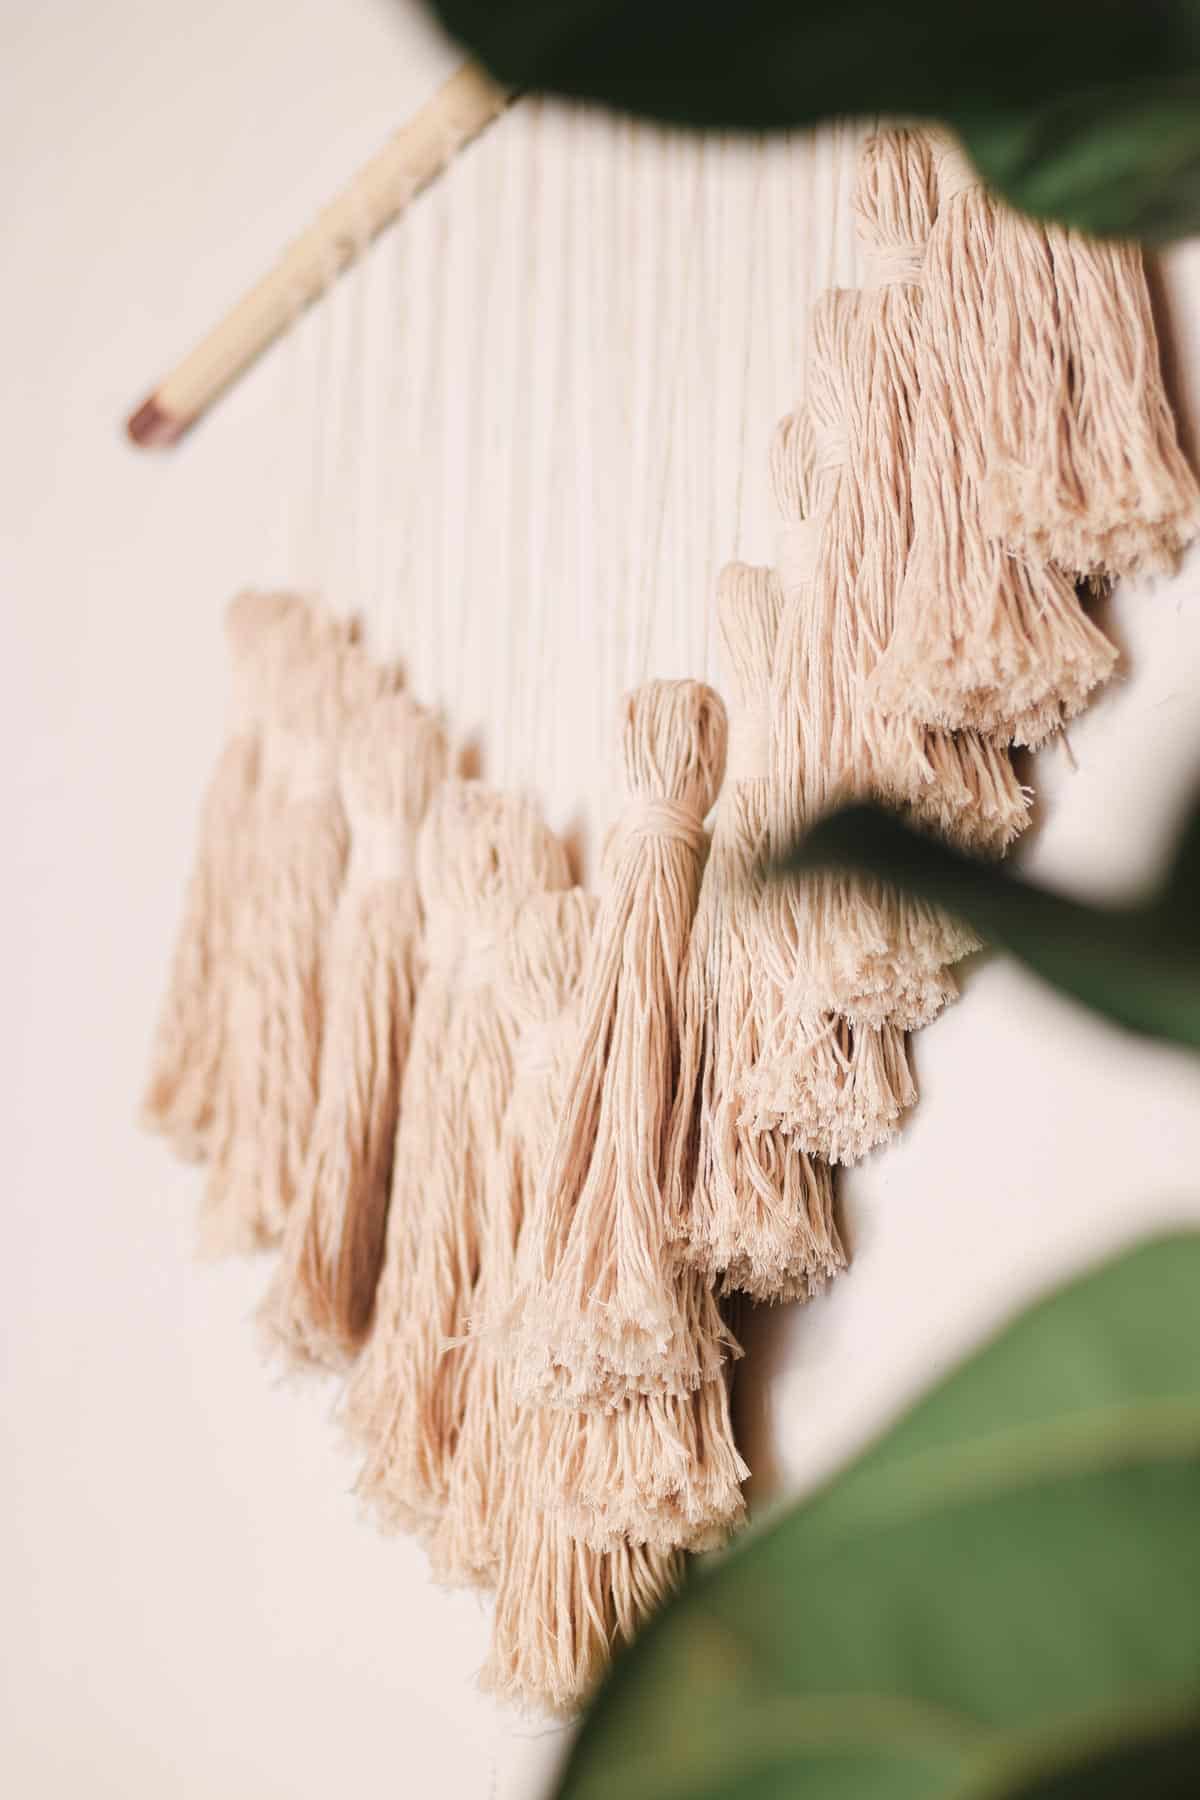 A cotton yarn wall hanging as seen through some bohemian plant leaves.